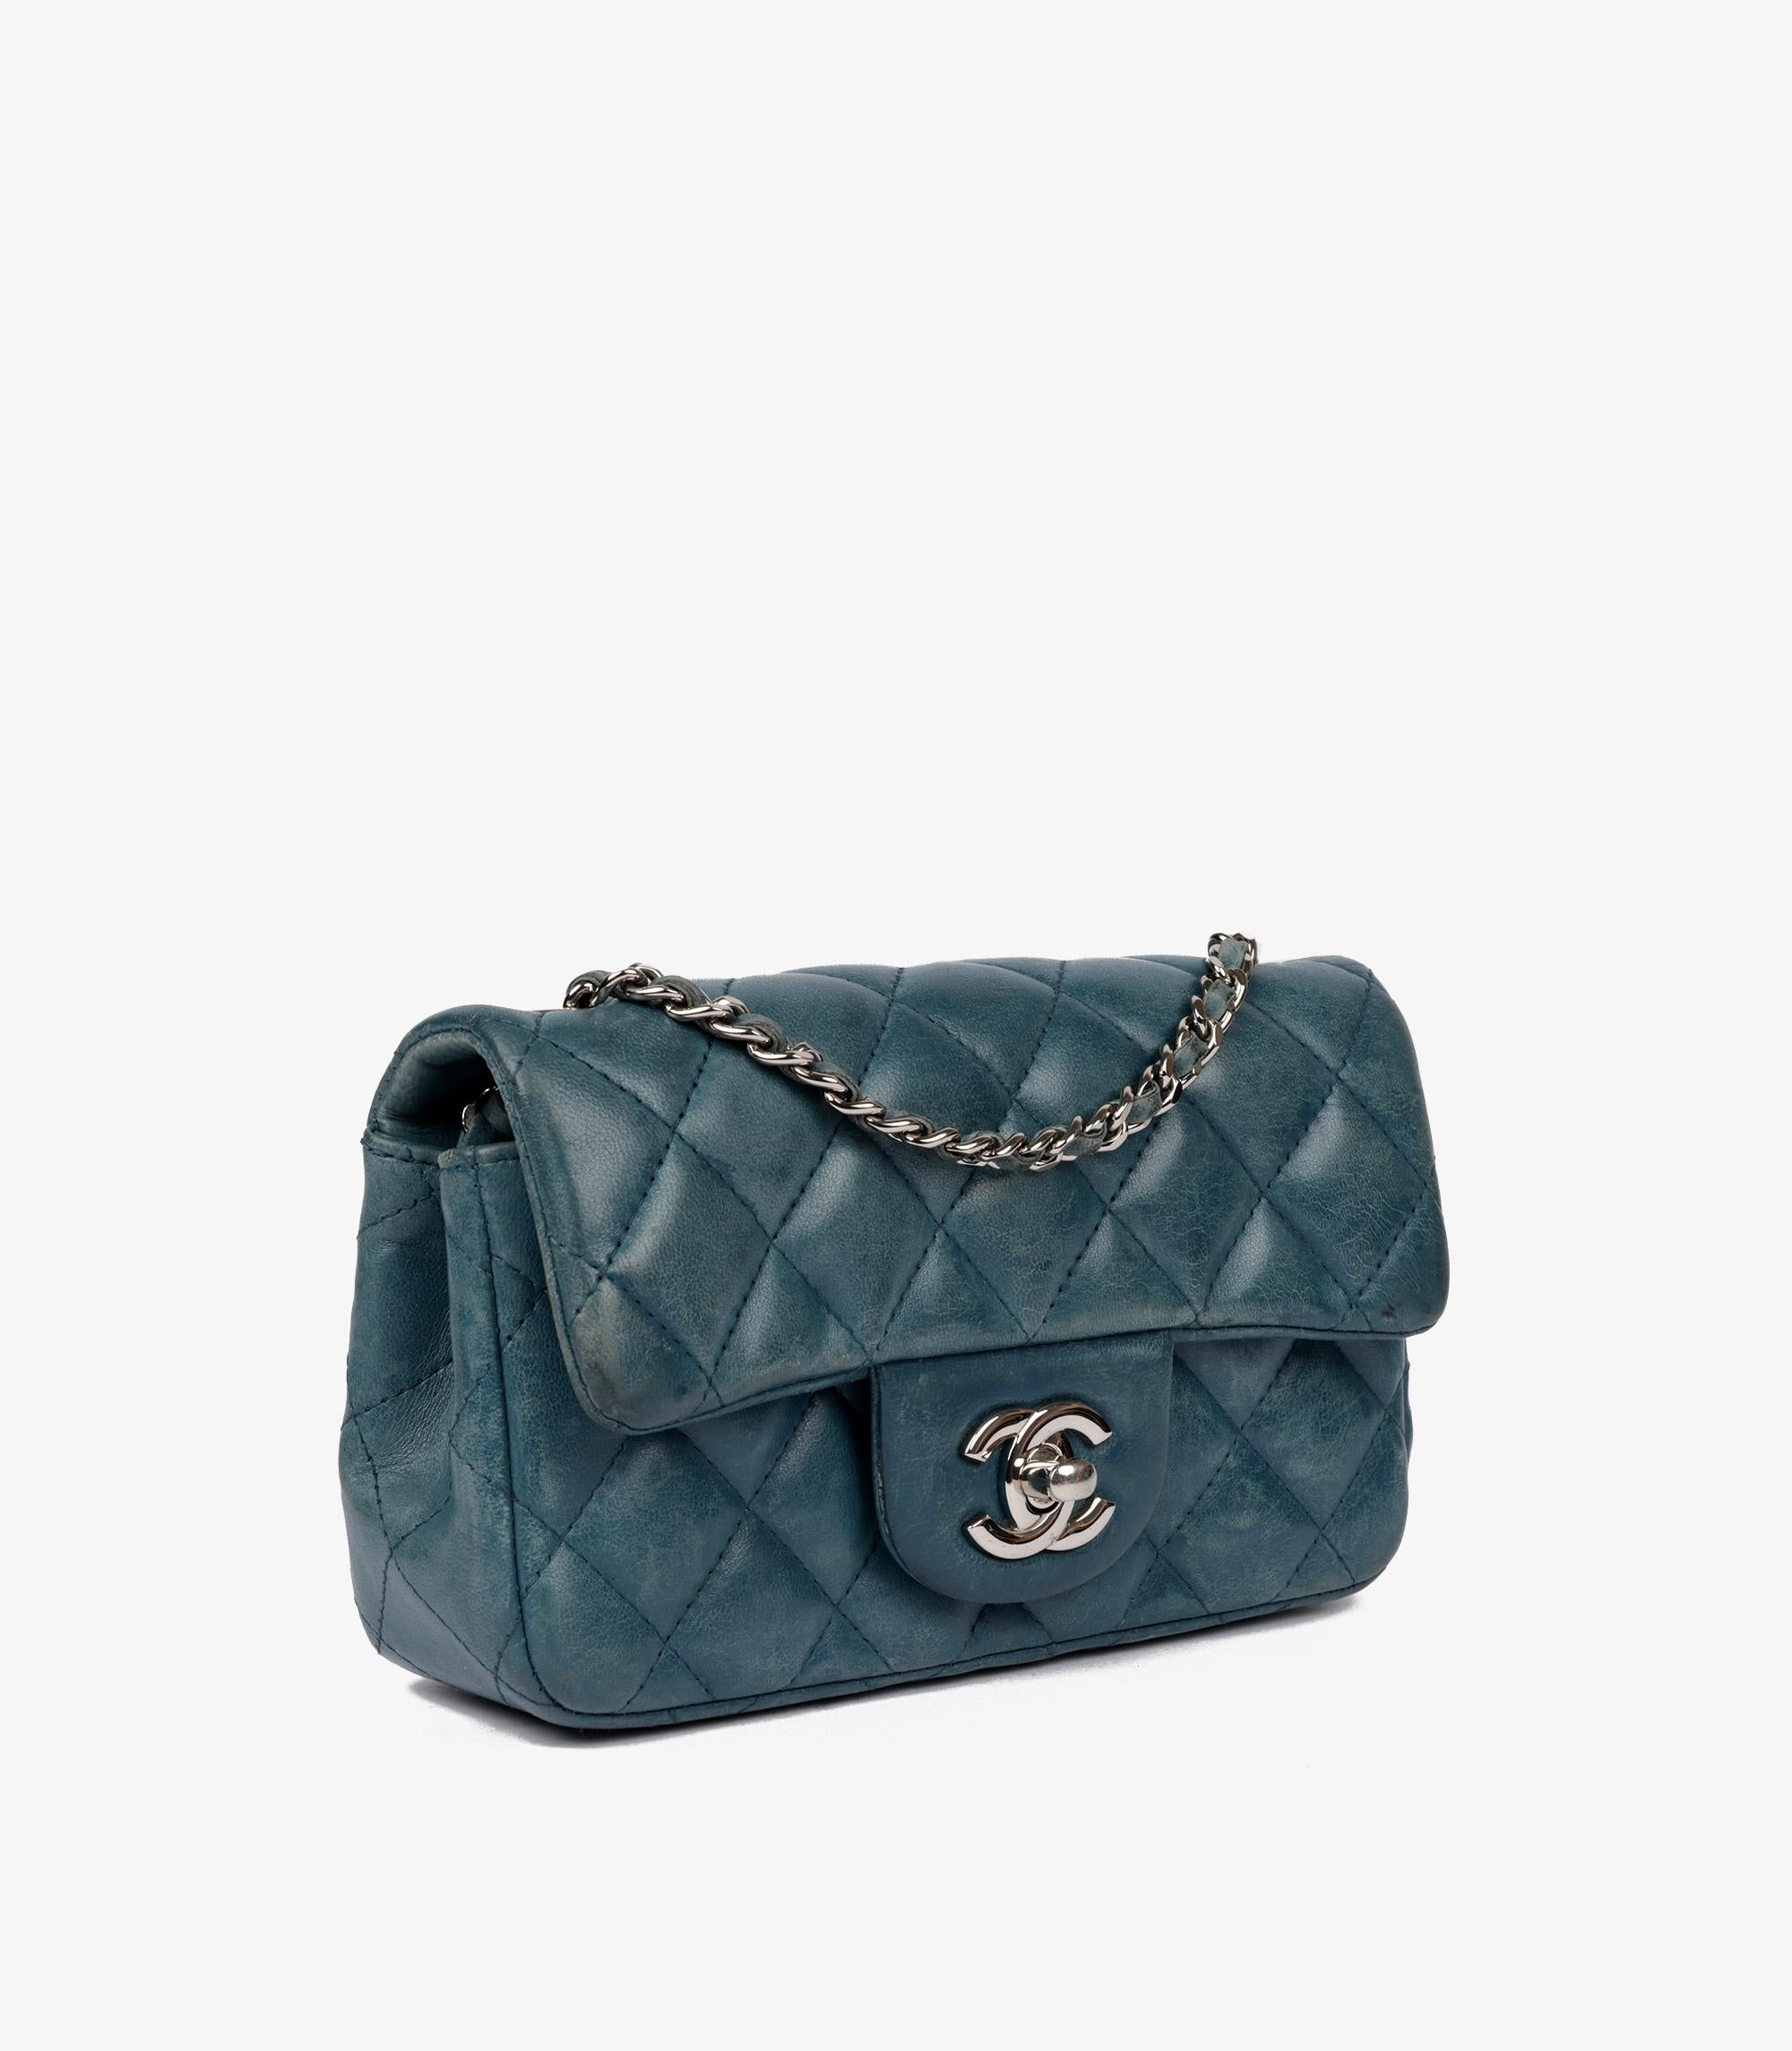 Chanel Teal Quilted Aged Lambskin Mini Rectangular Flap Bag In Excellent Condition For Sale In Bishop's Stortford, Hertfordshire